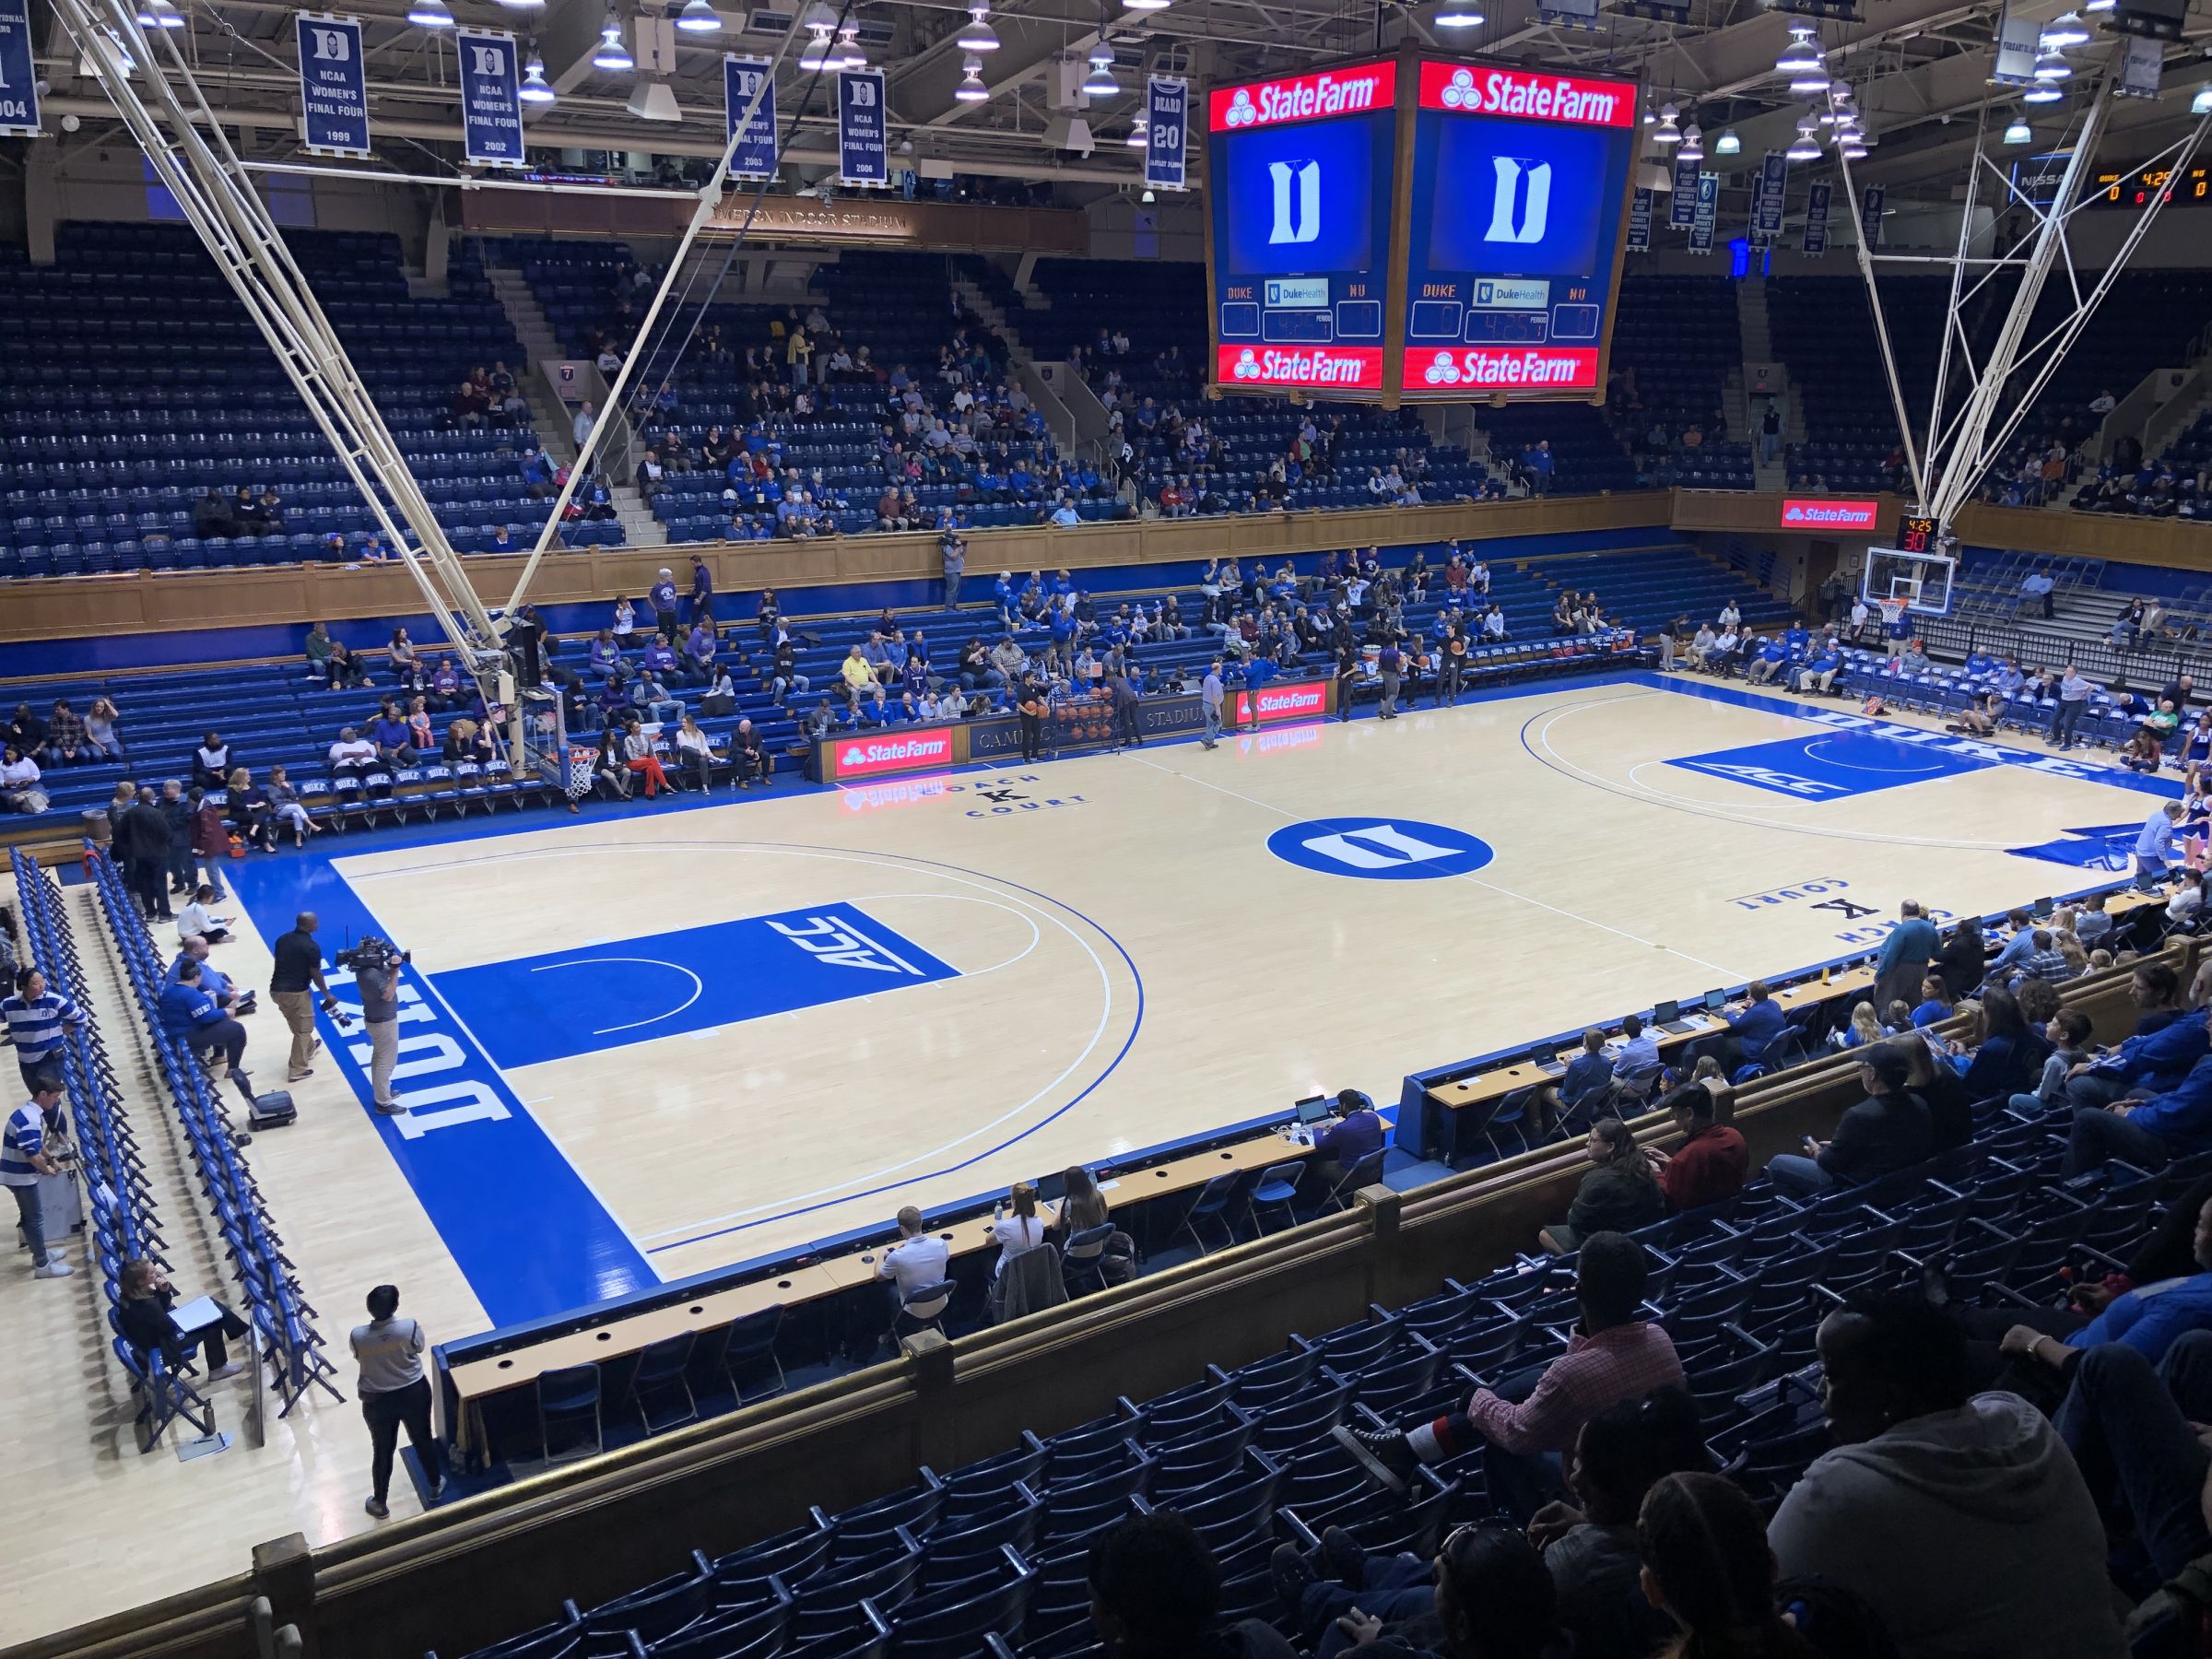 Cameron Indoor Stadium Seating Chart With Rows And Seat Numbers | Elcho ...